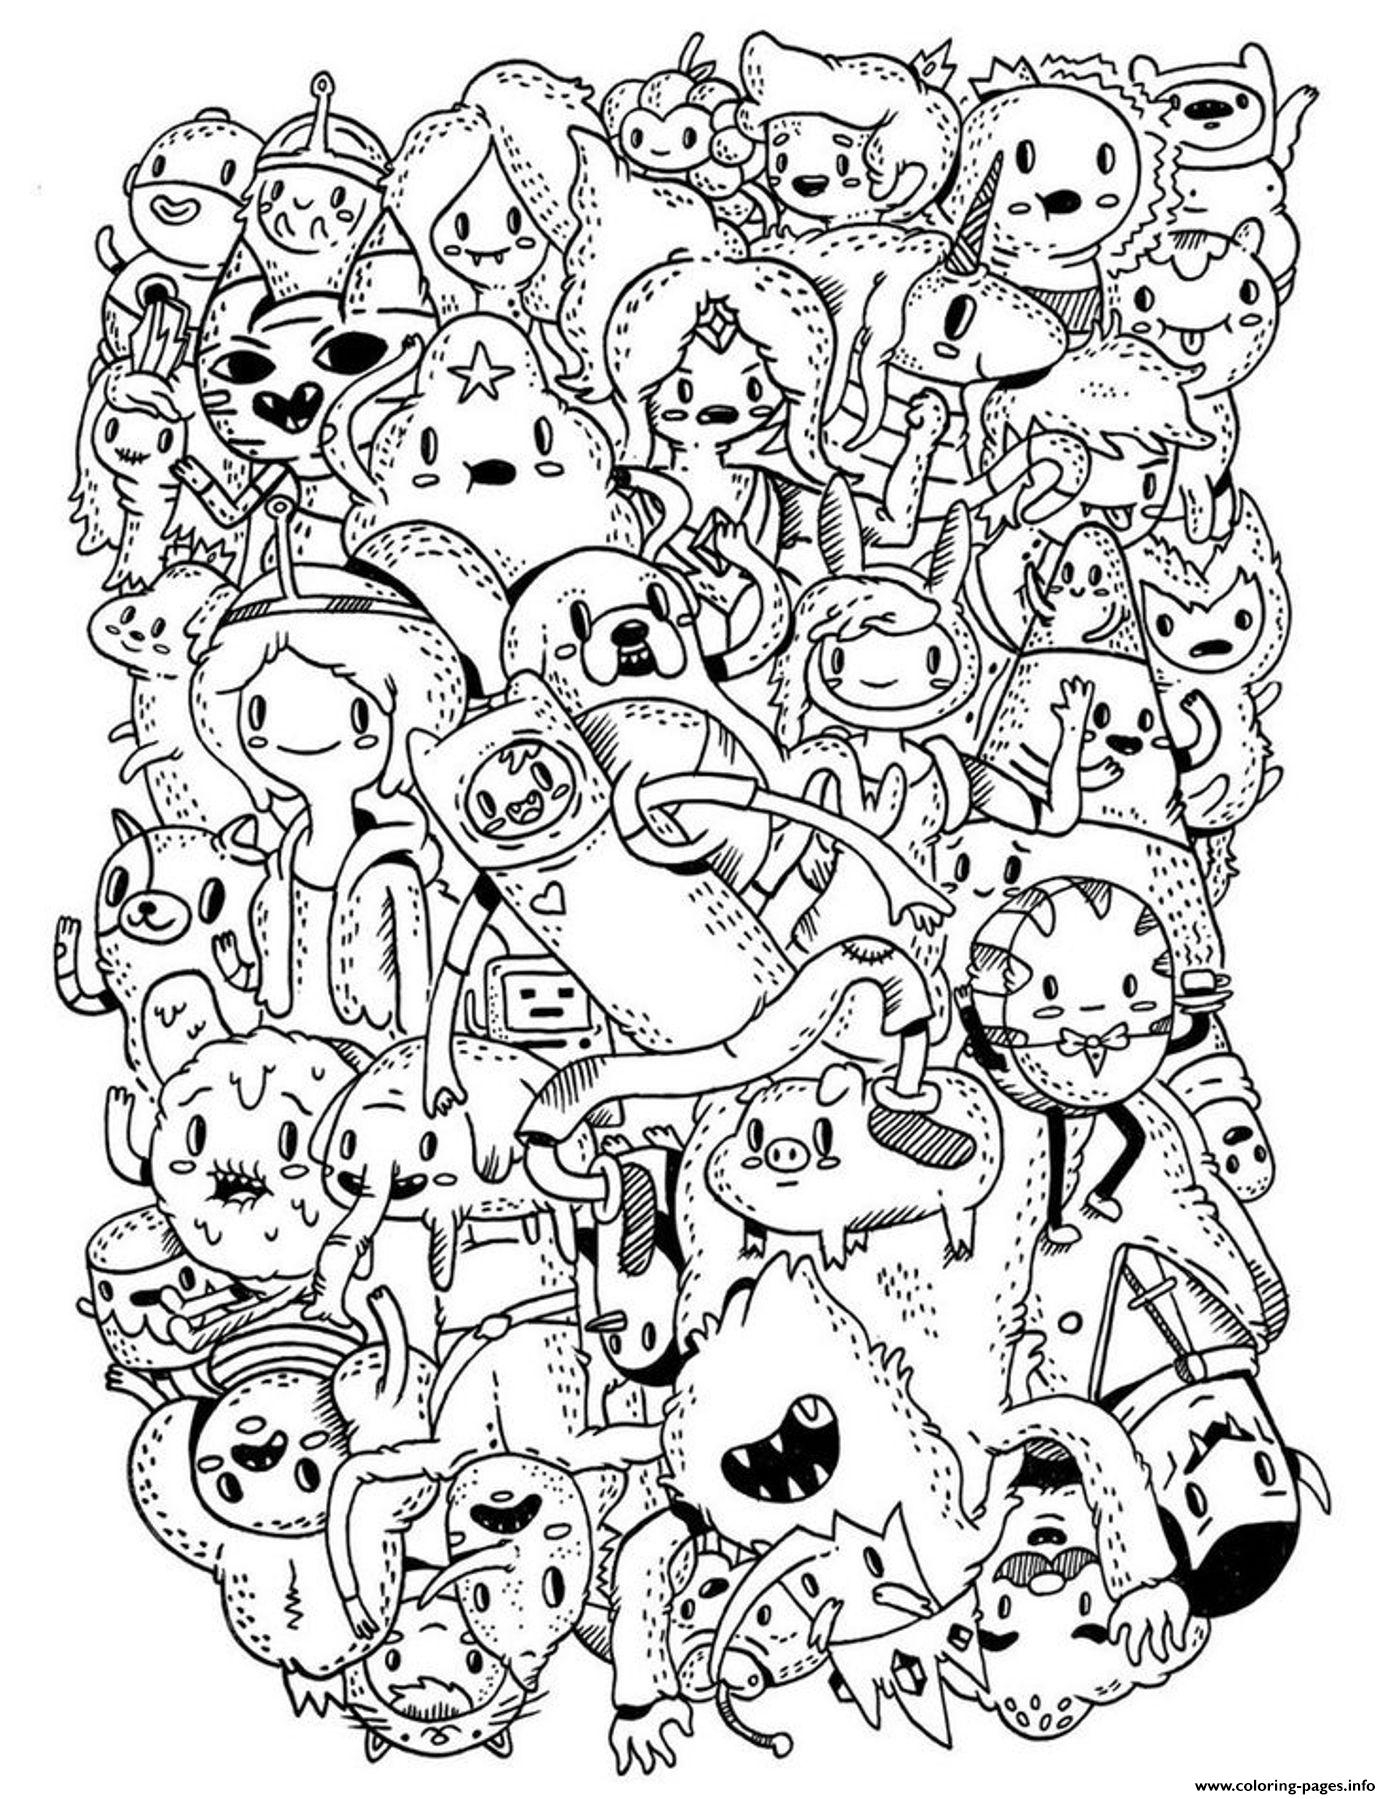 Printable Adventure Time Coloring Pages Adventure Time S For Kids1bd7 Coloring Pages Printable